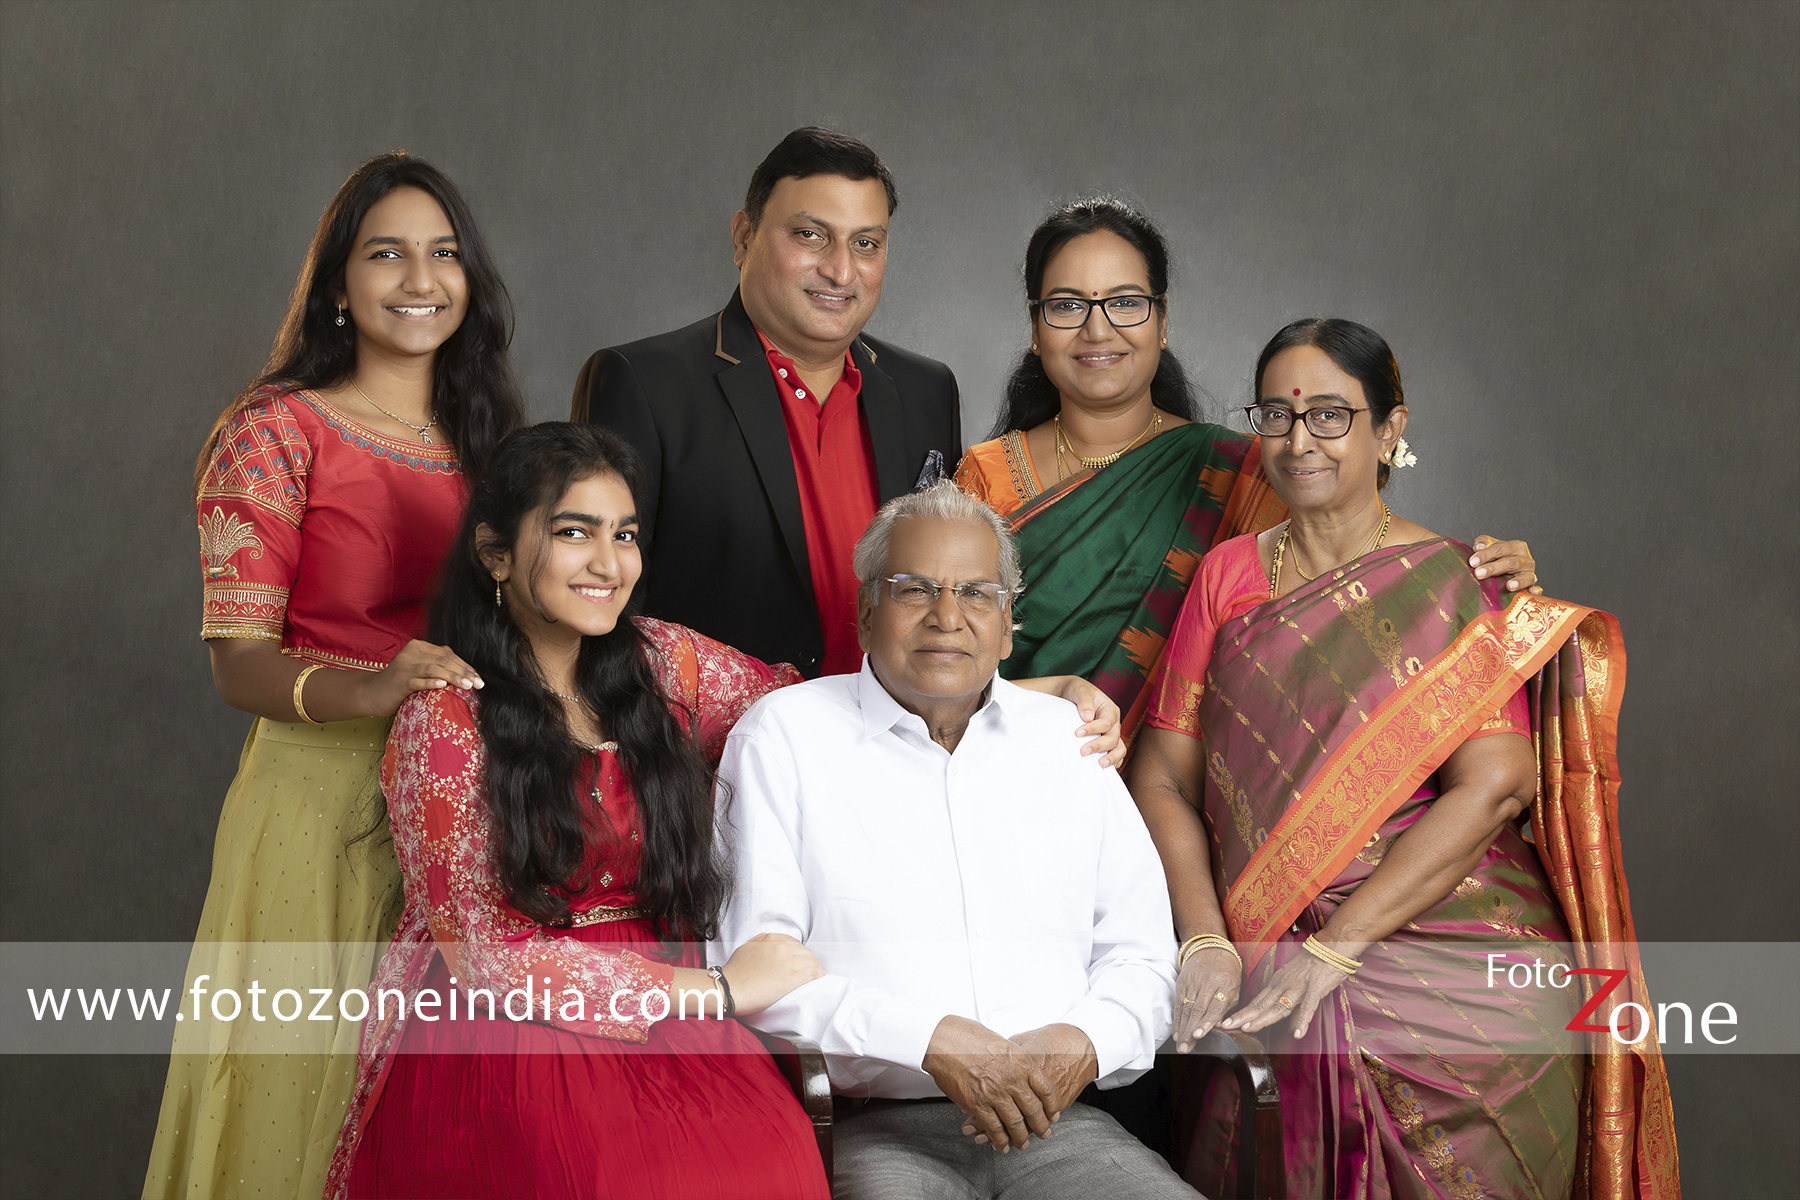 Group photography tips and poses for family portraits outdoors